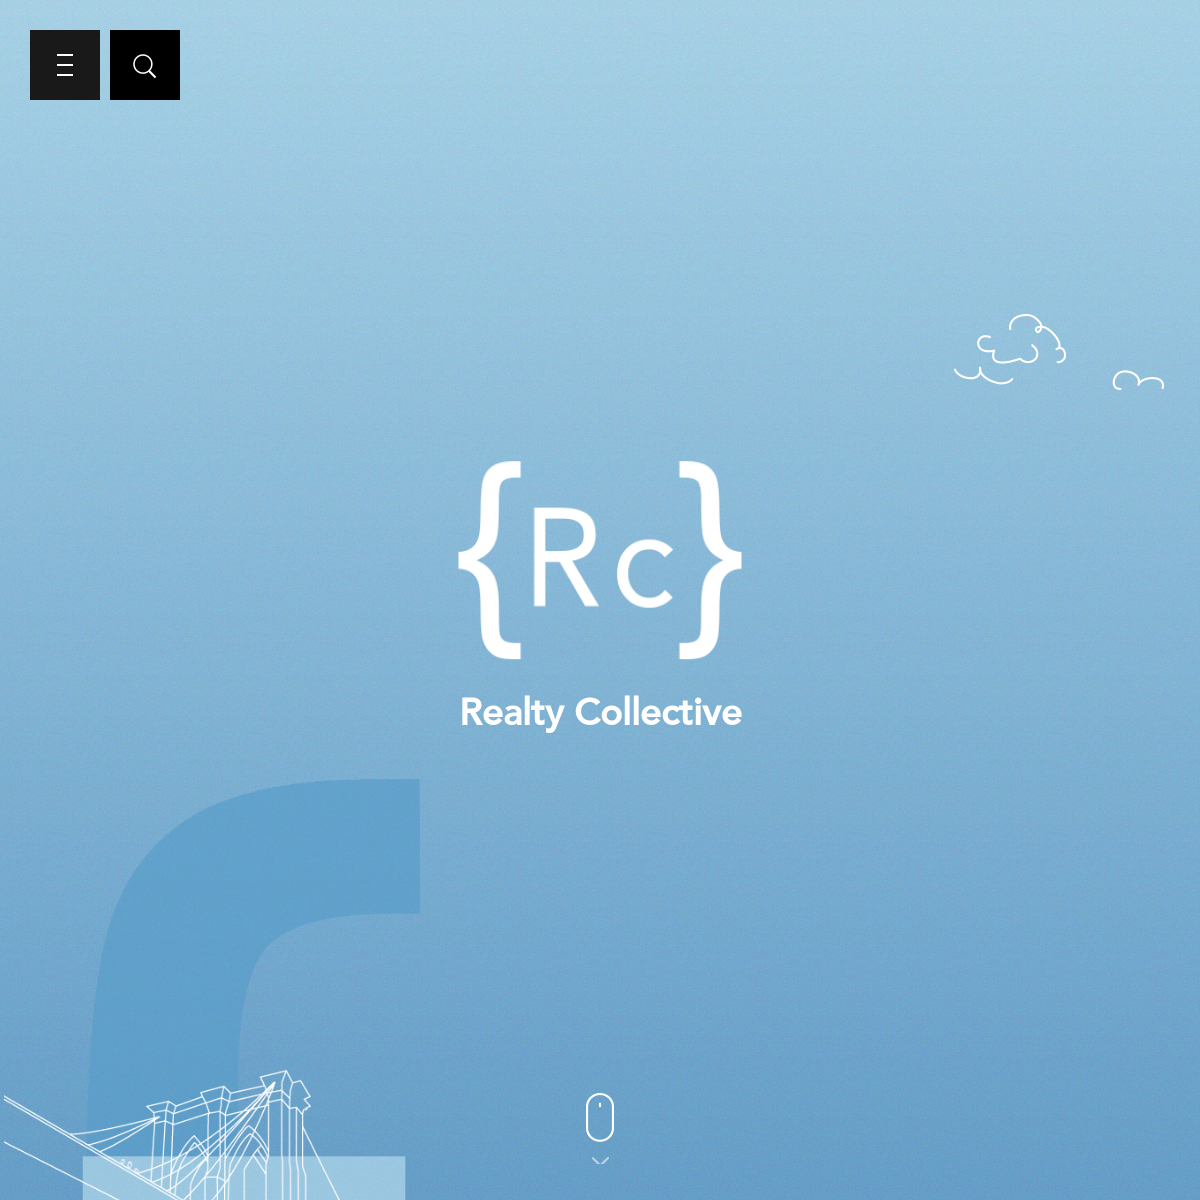 A complete backup of realtycollective.com